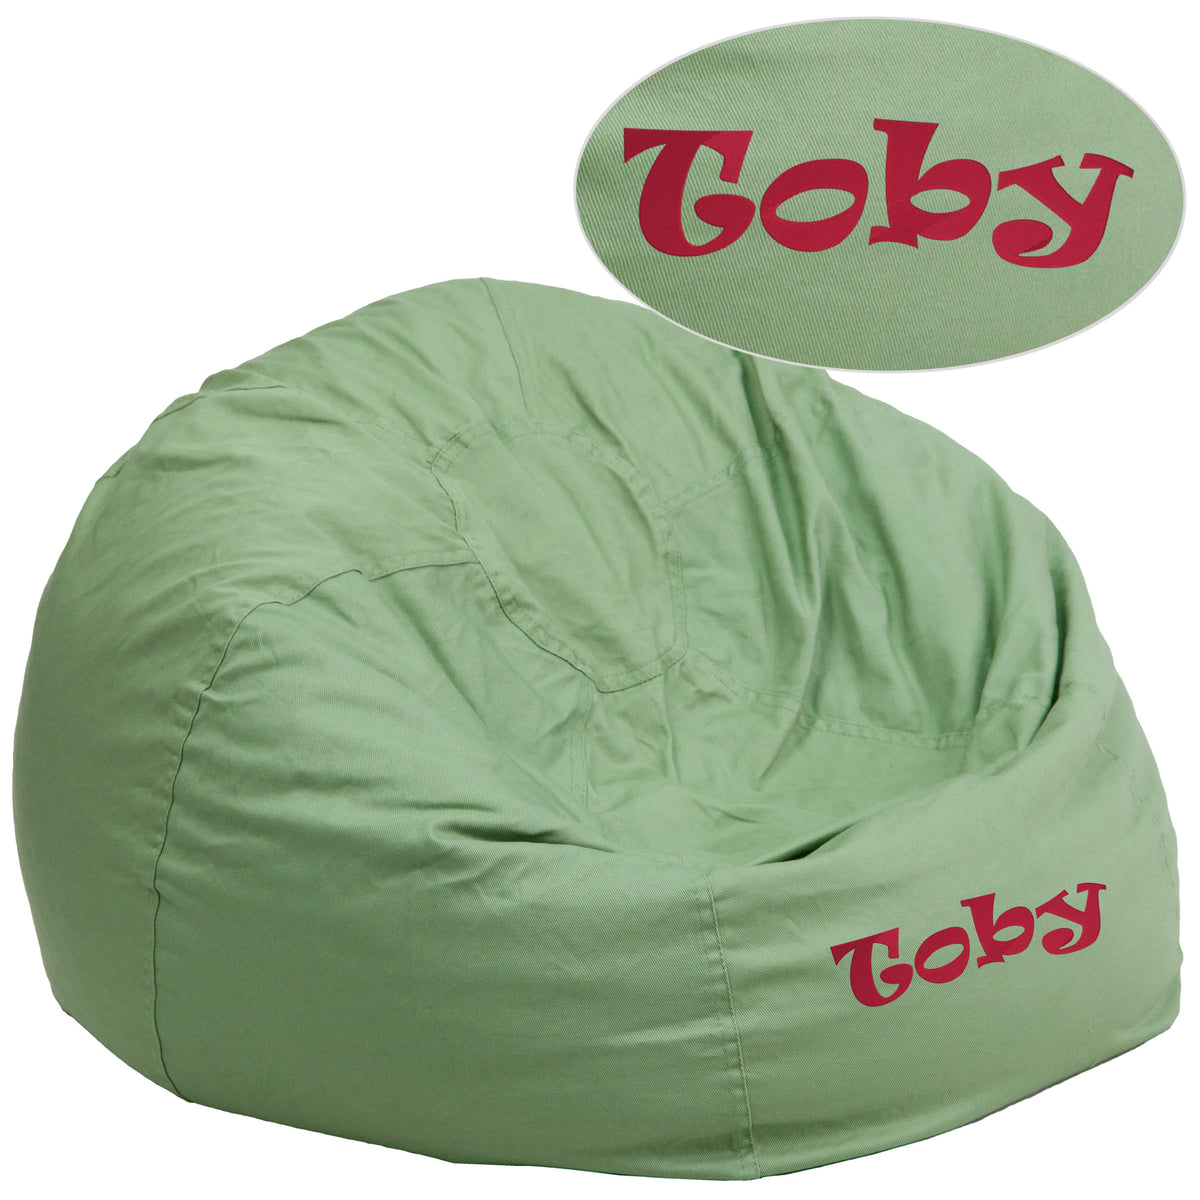 Green |#| Personalized Oversized Solid Green Refillable Bean Bag Chair for Kids and Adults